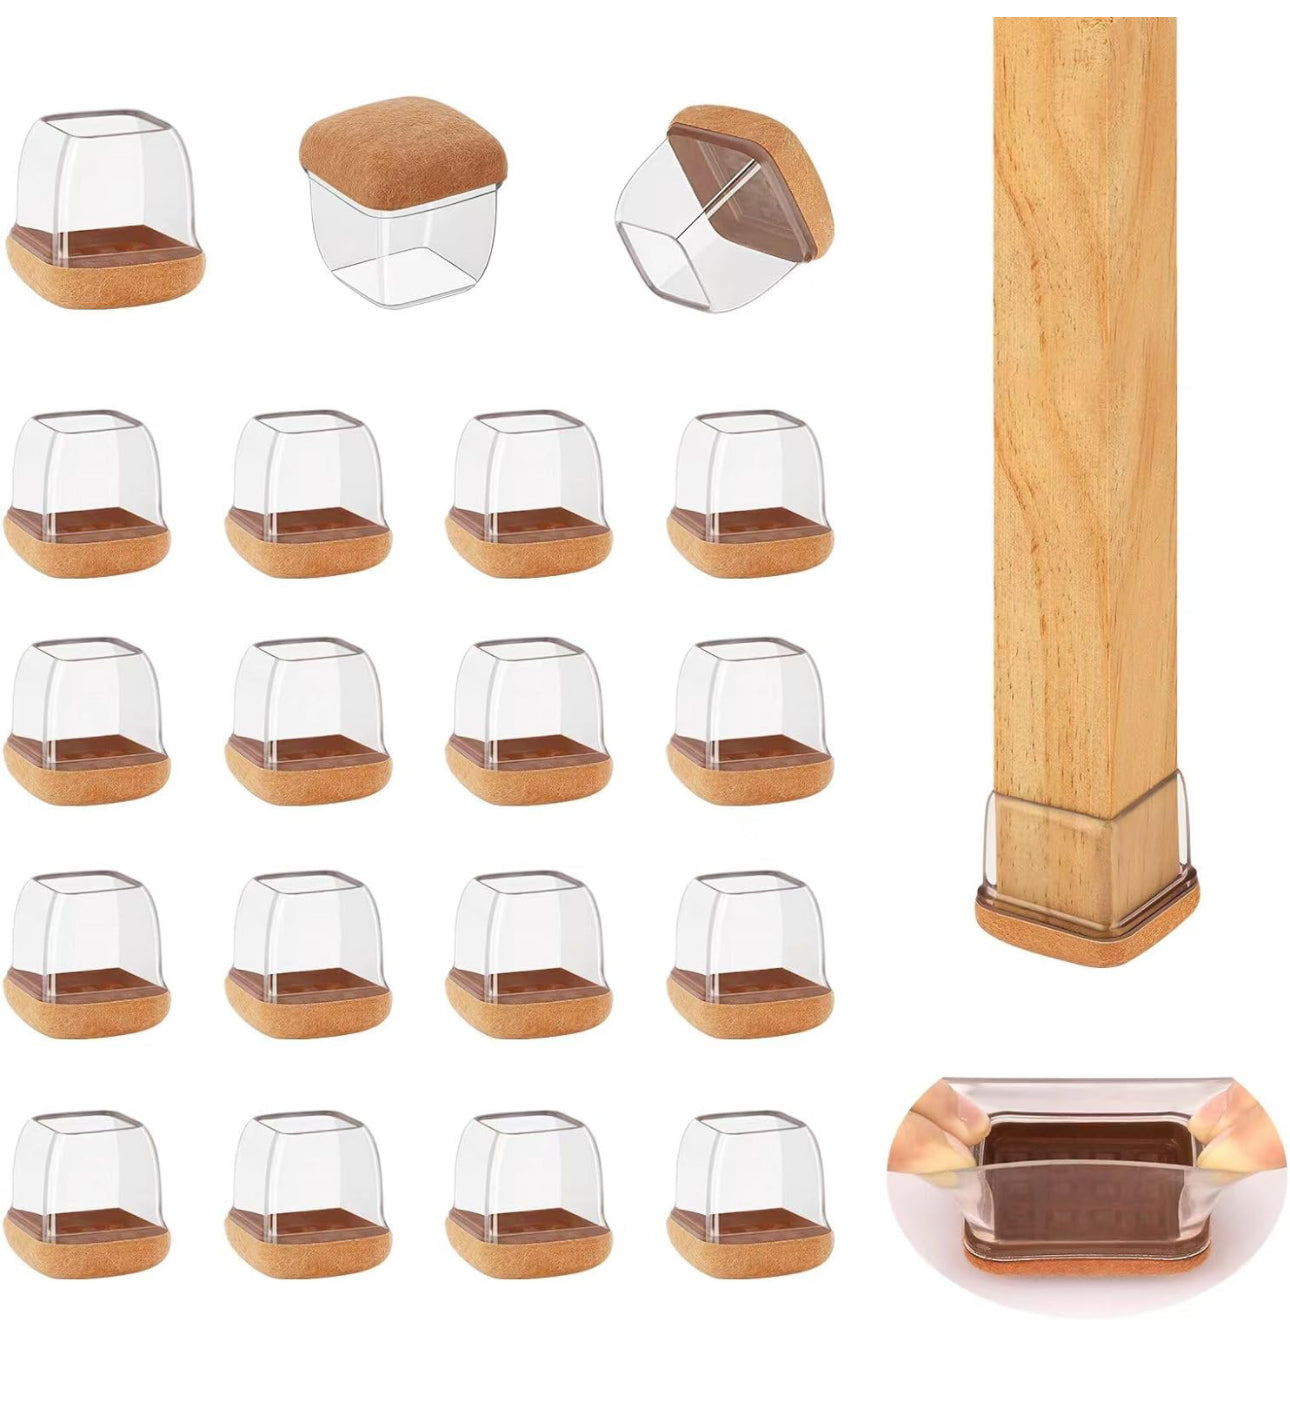 16 Pcs Small Square Chair Leg Protectors for Hardwood Floors, Silicone Chair Leg Floor Protectors (fit 0.5”-0.7”)